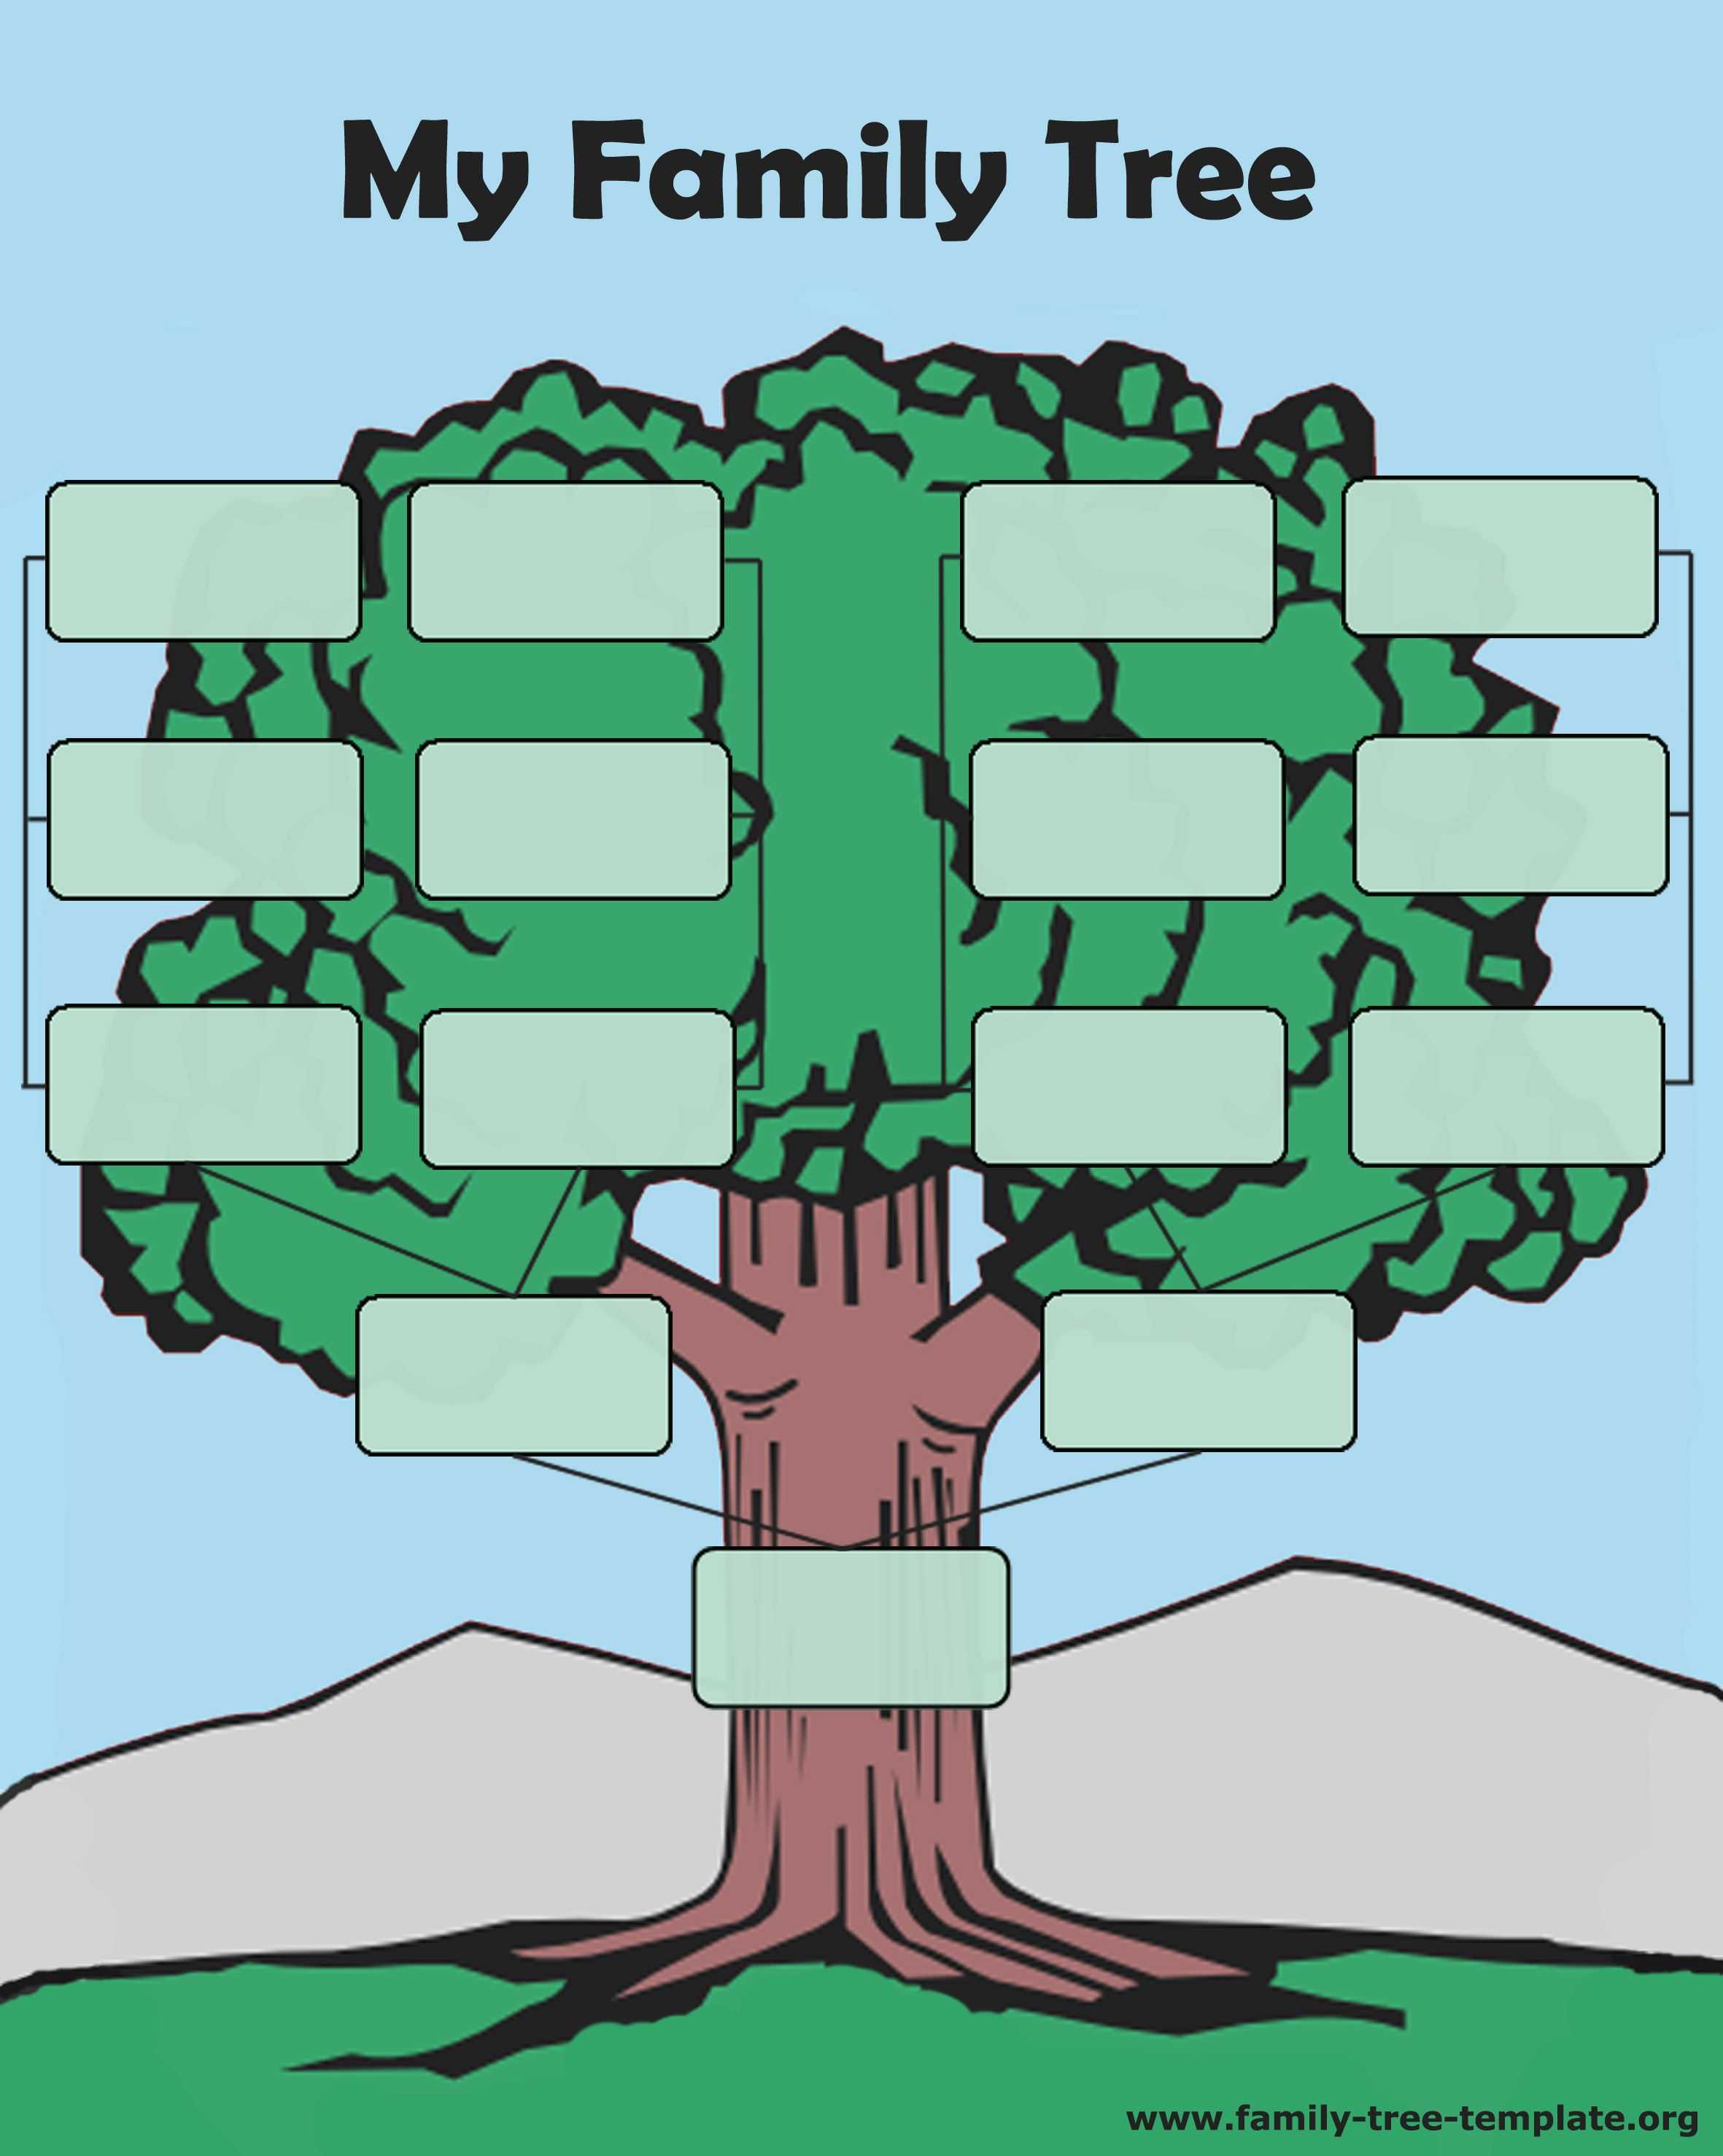 Tree Forms To Print And Fill Out Another Printable Oak Tree In Fill In The Blank Family Tree Template